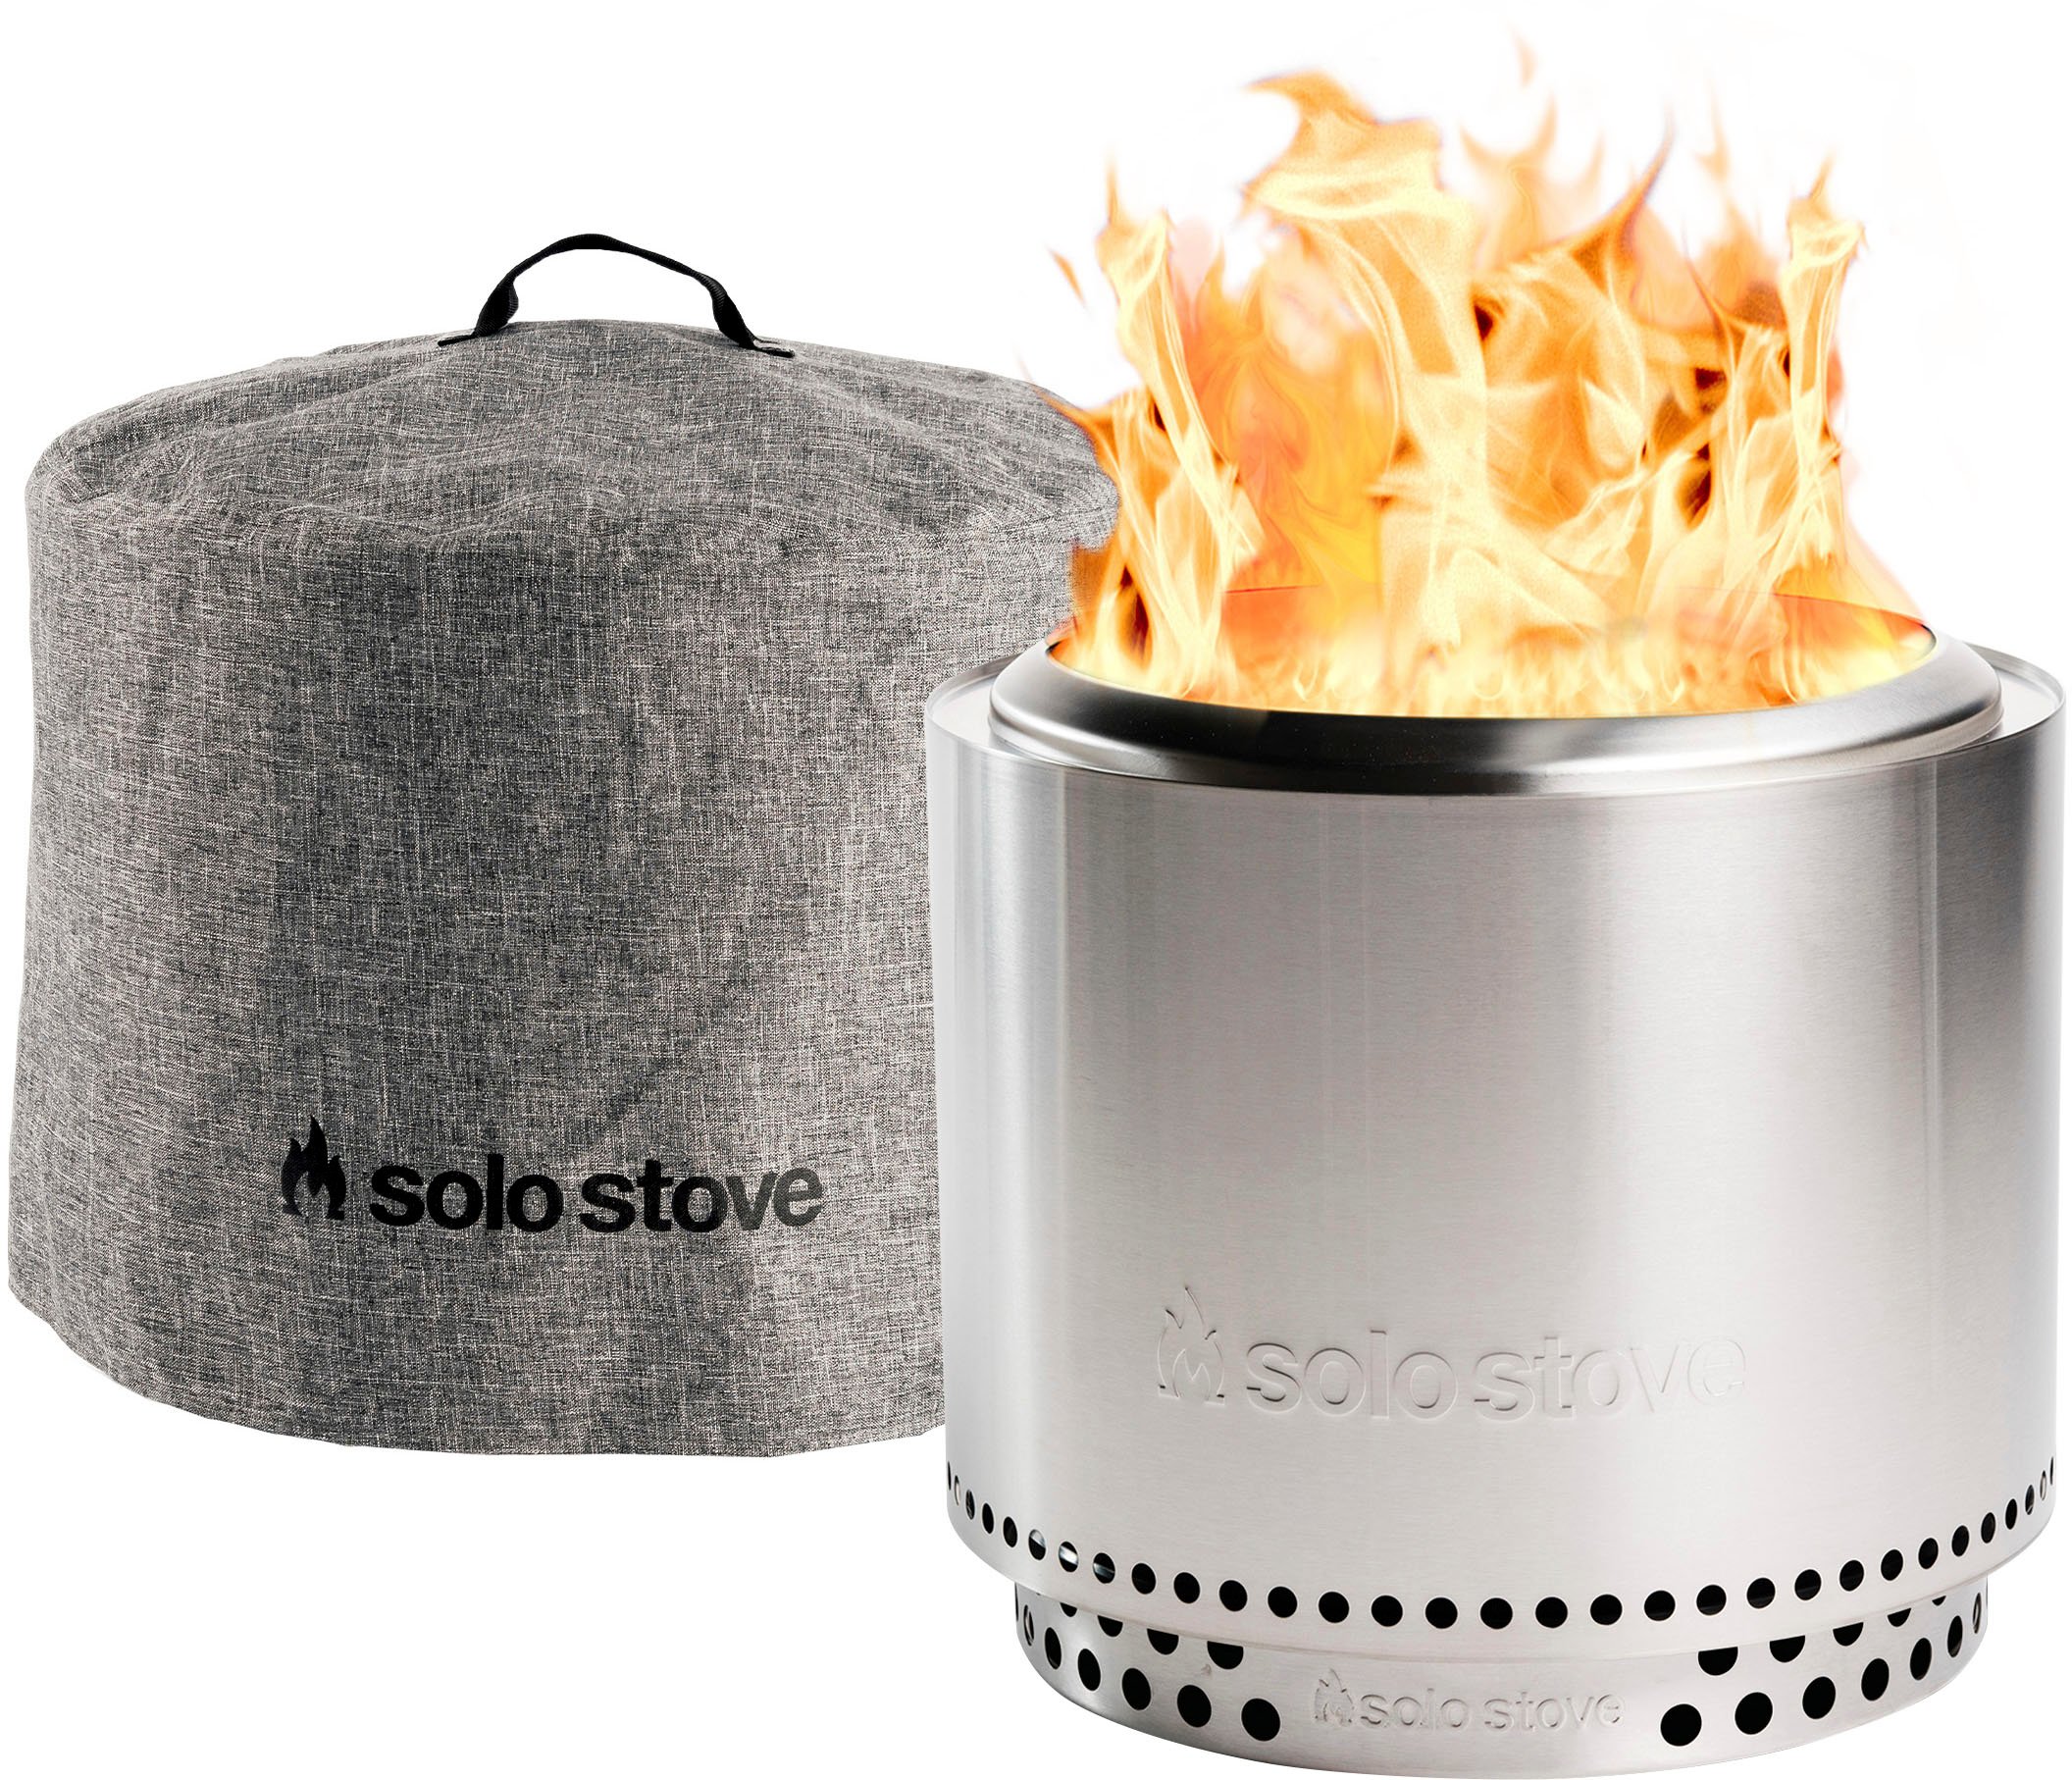 Solo Stove Bonfire + Stand & Shelter 2.0 Bundle Stainless Steel 